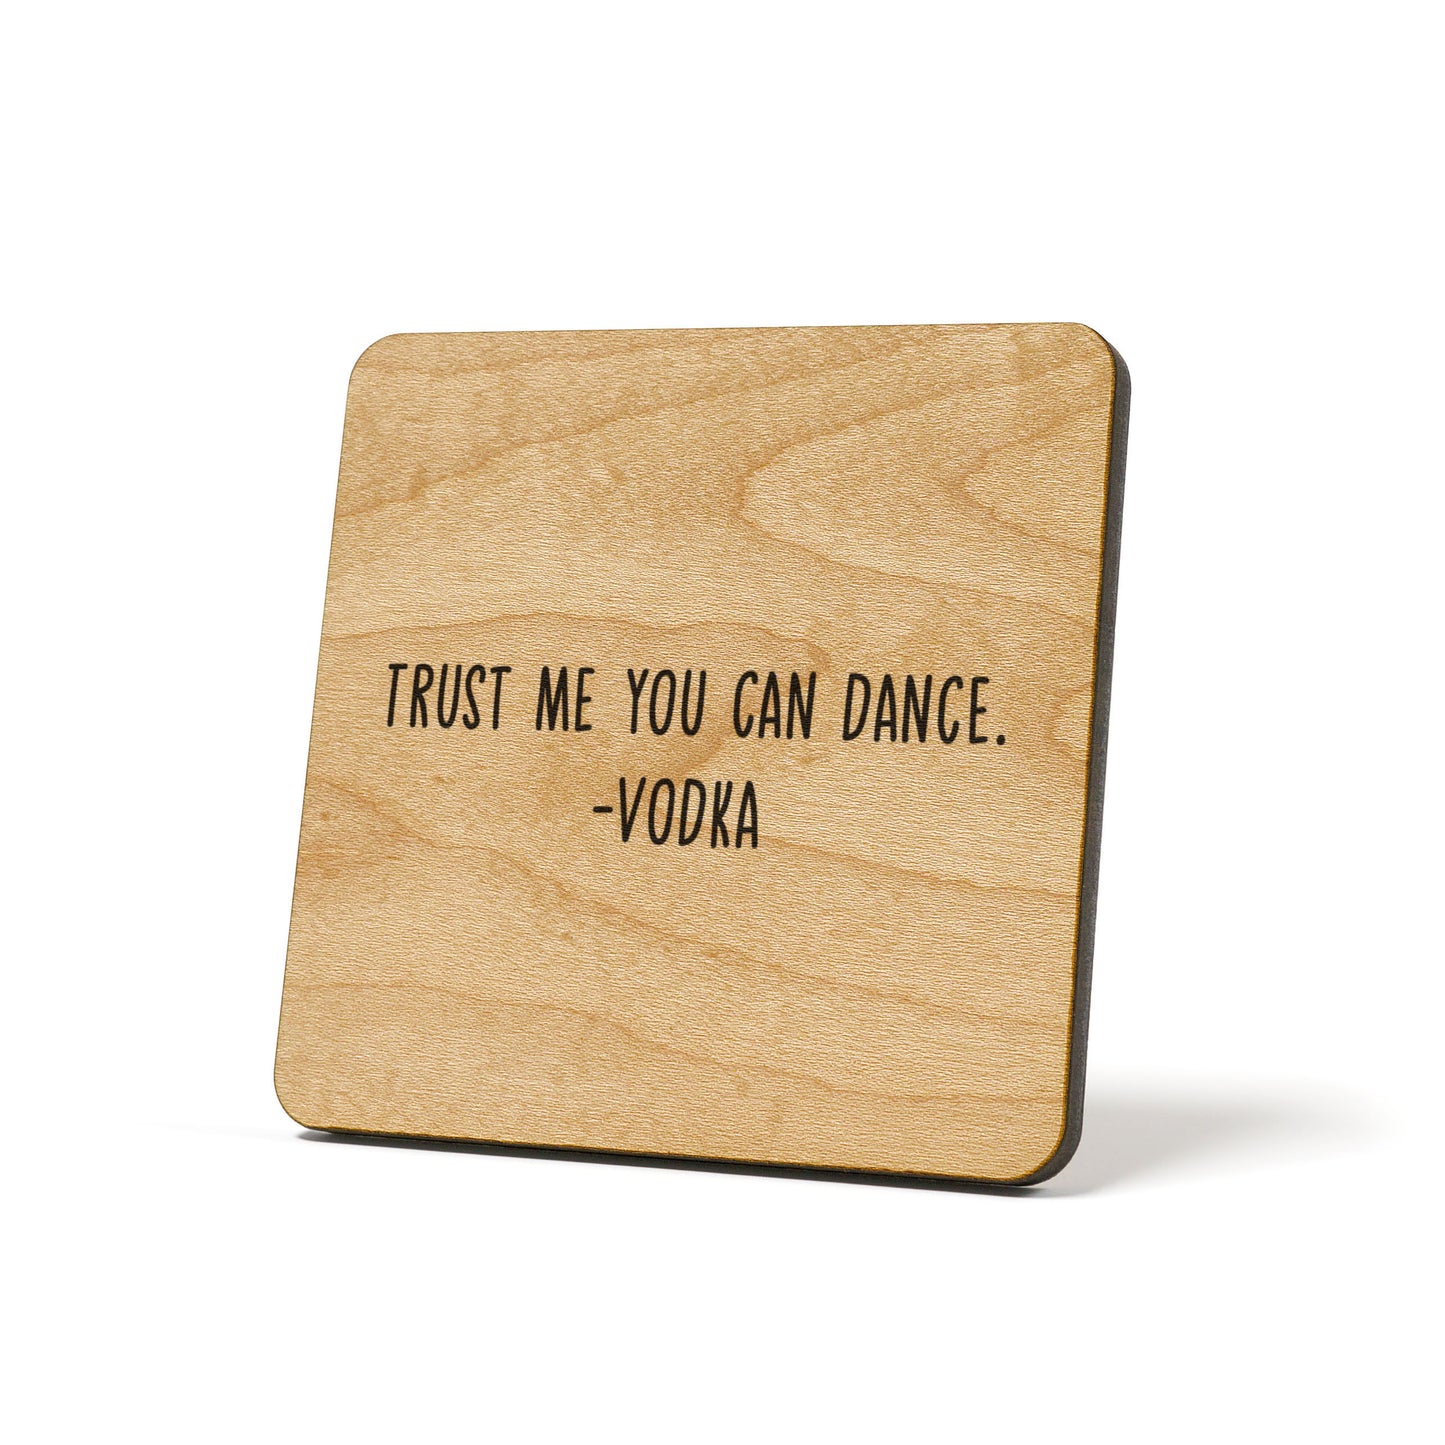 Trust me you can dance. Vodka Quote Coaster